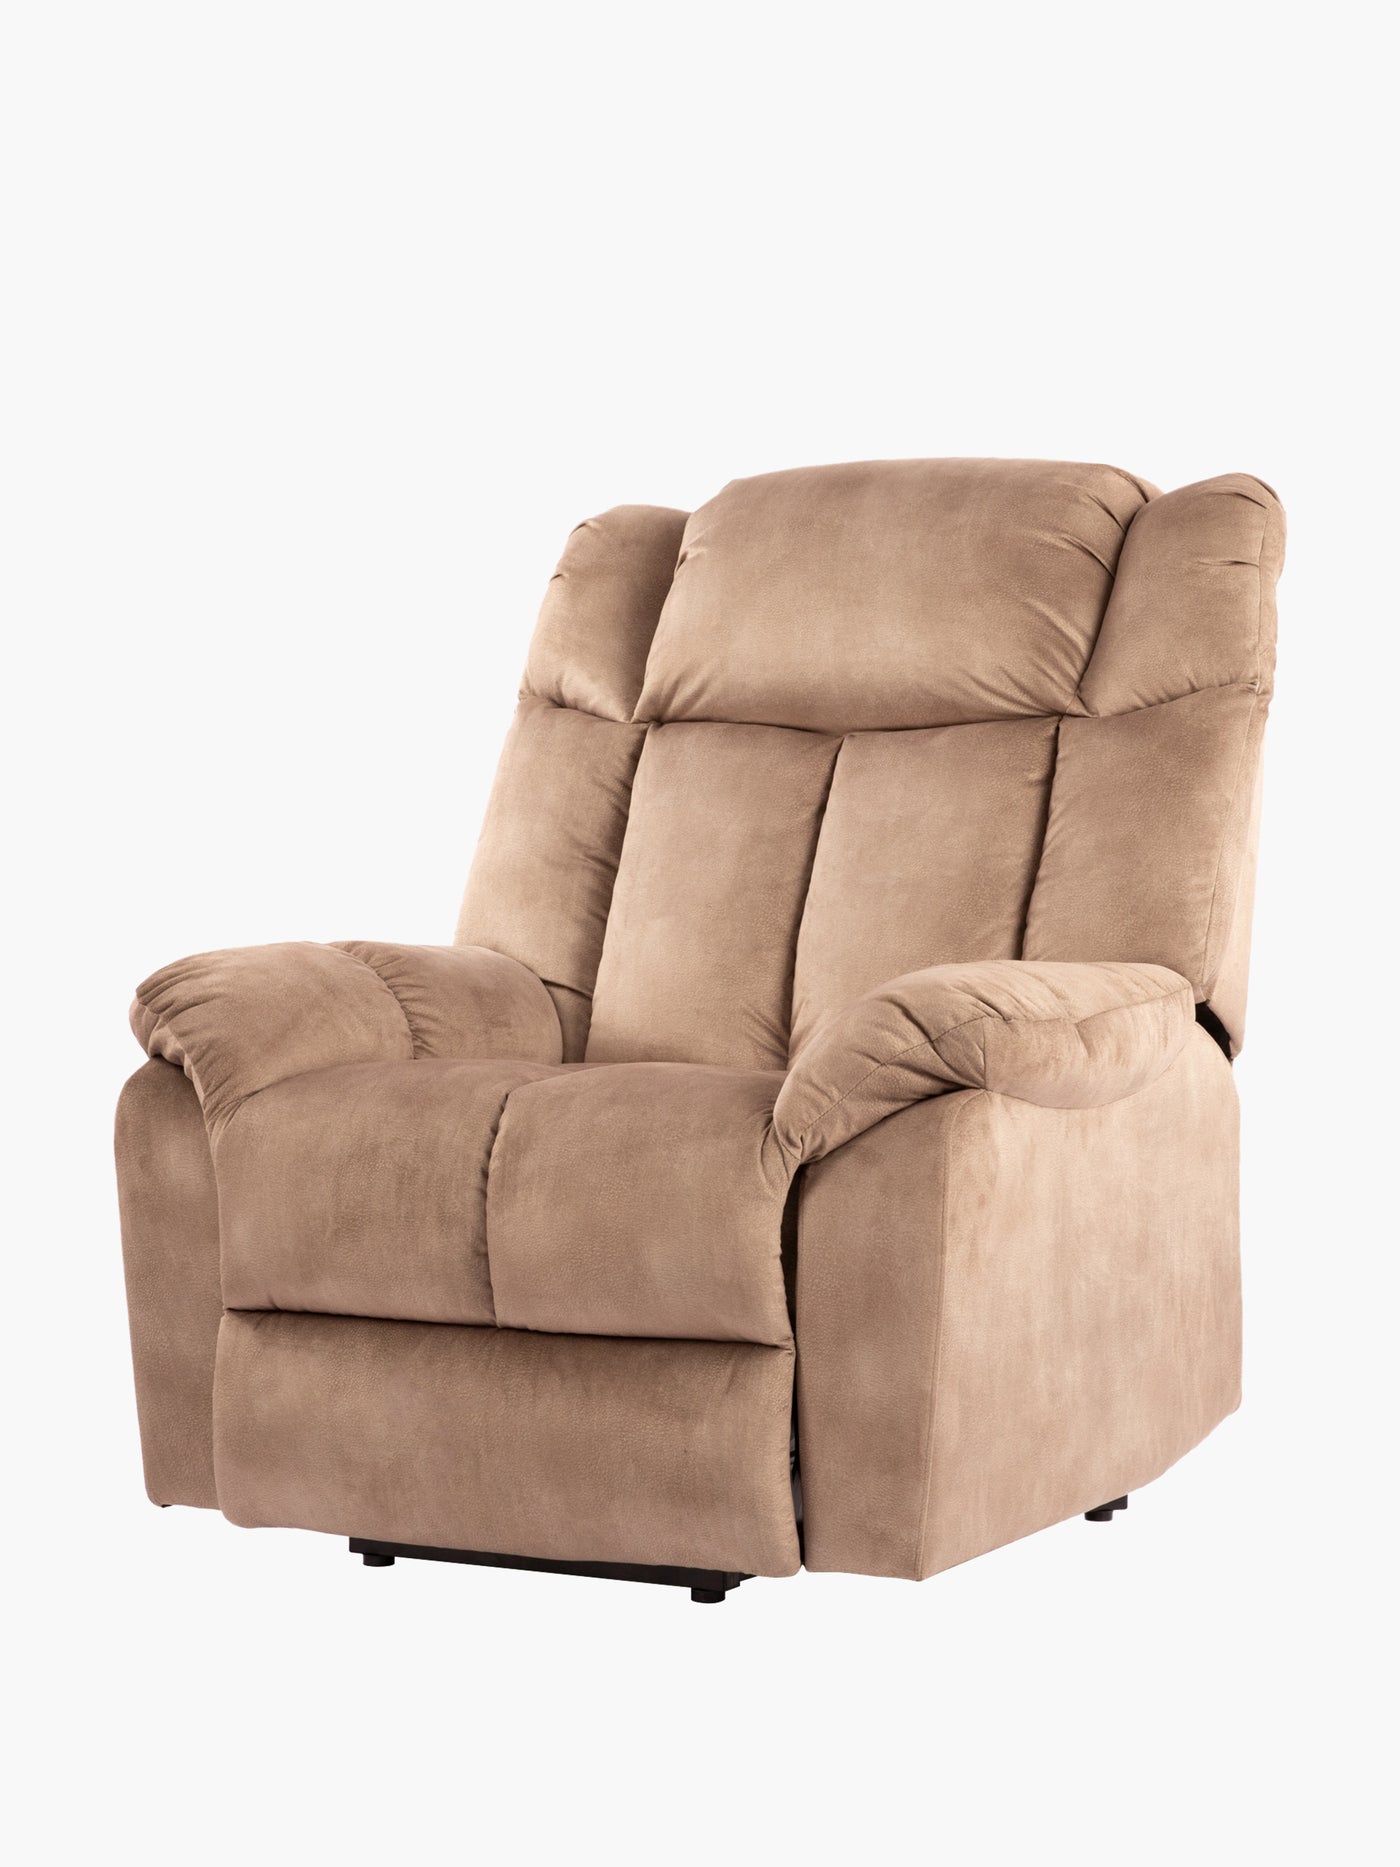 COLAMY Living Room Lift Chair with Overstuffed Design CL8233 Camel #color_camel